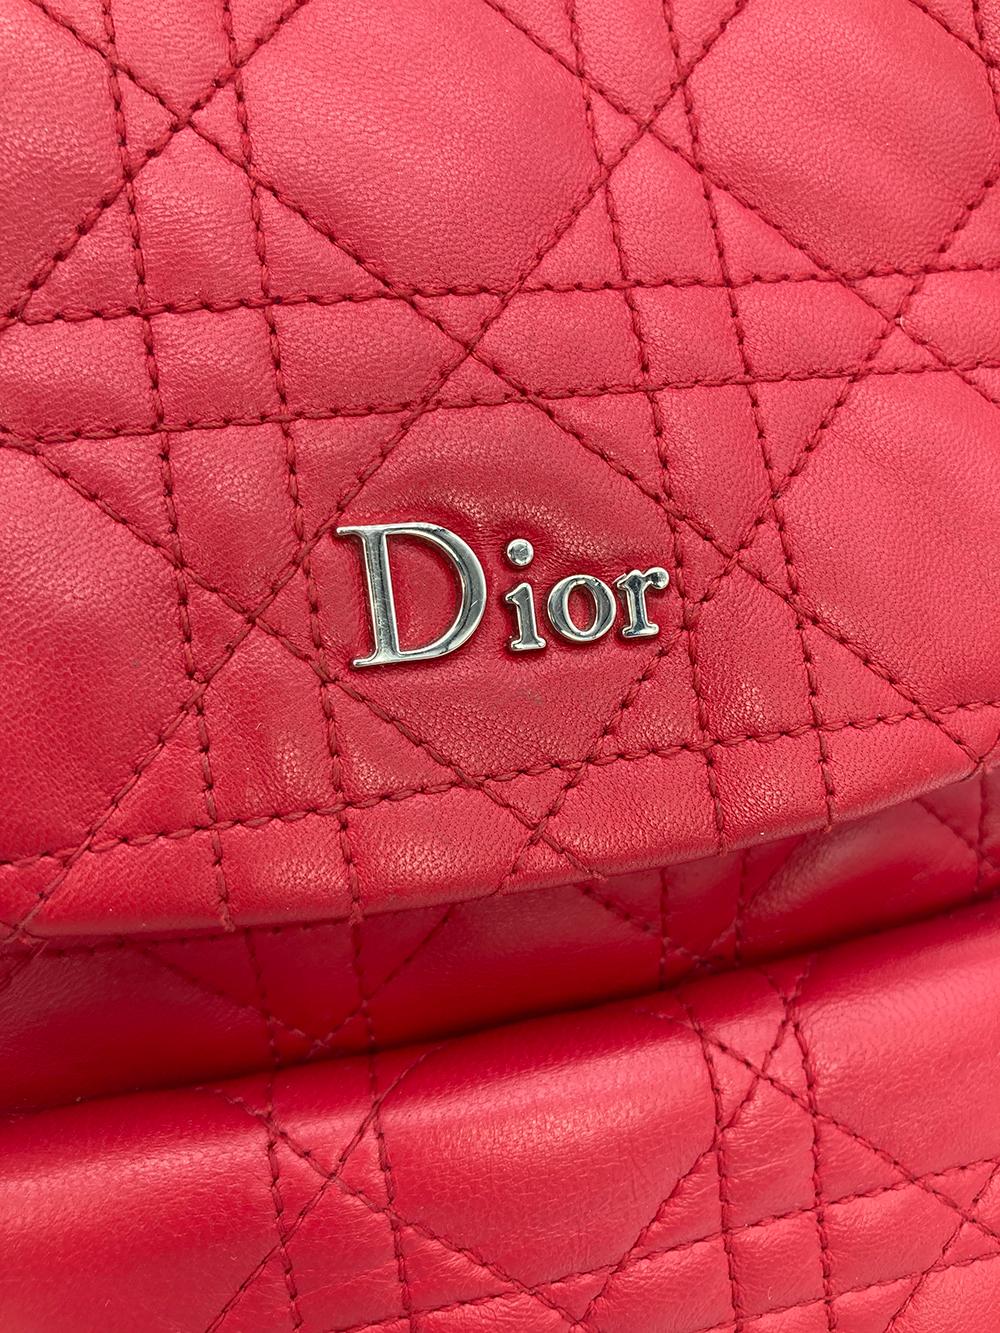 Women's Christian Dior Red Cannage Quilted Leather Stardust Backpack